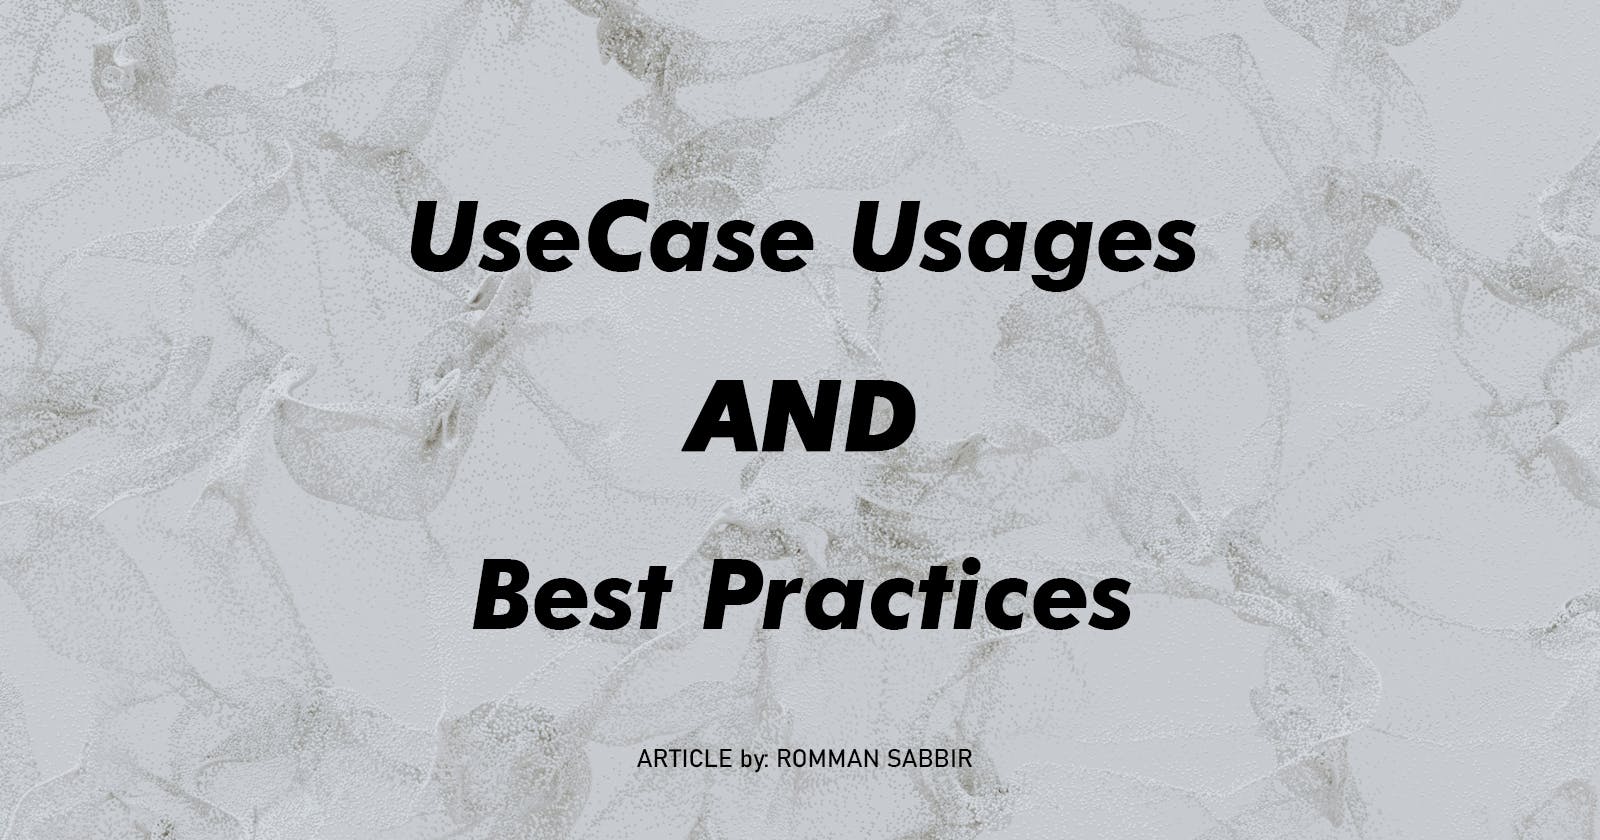 UseCase Usages and Best Practices